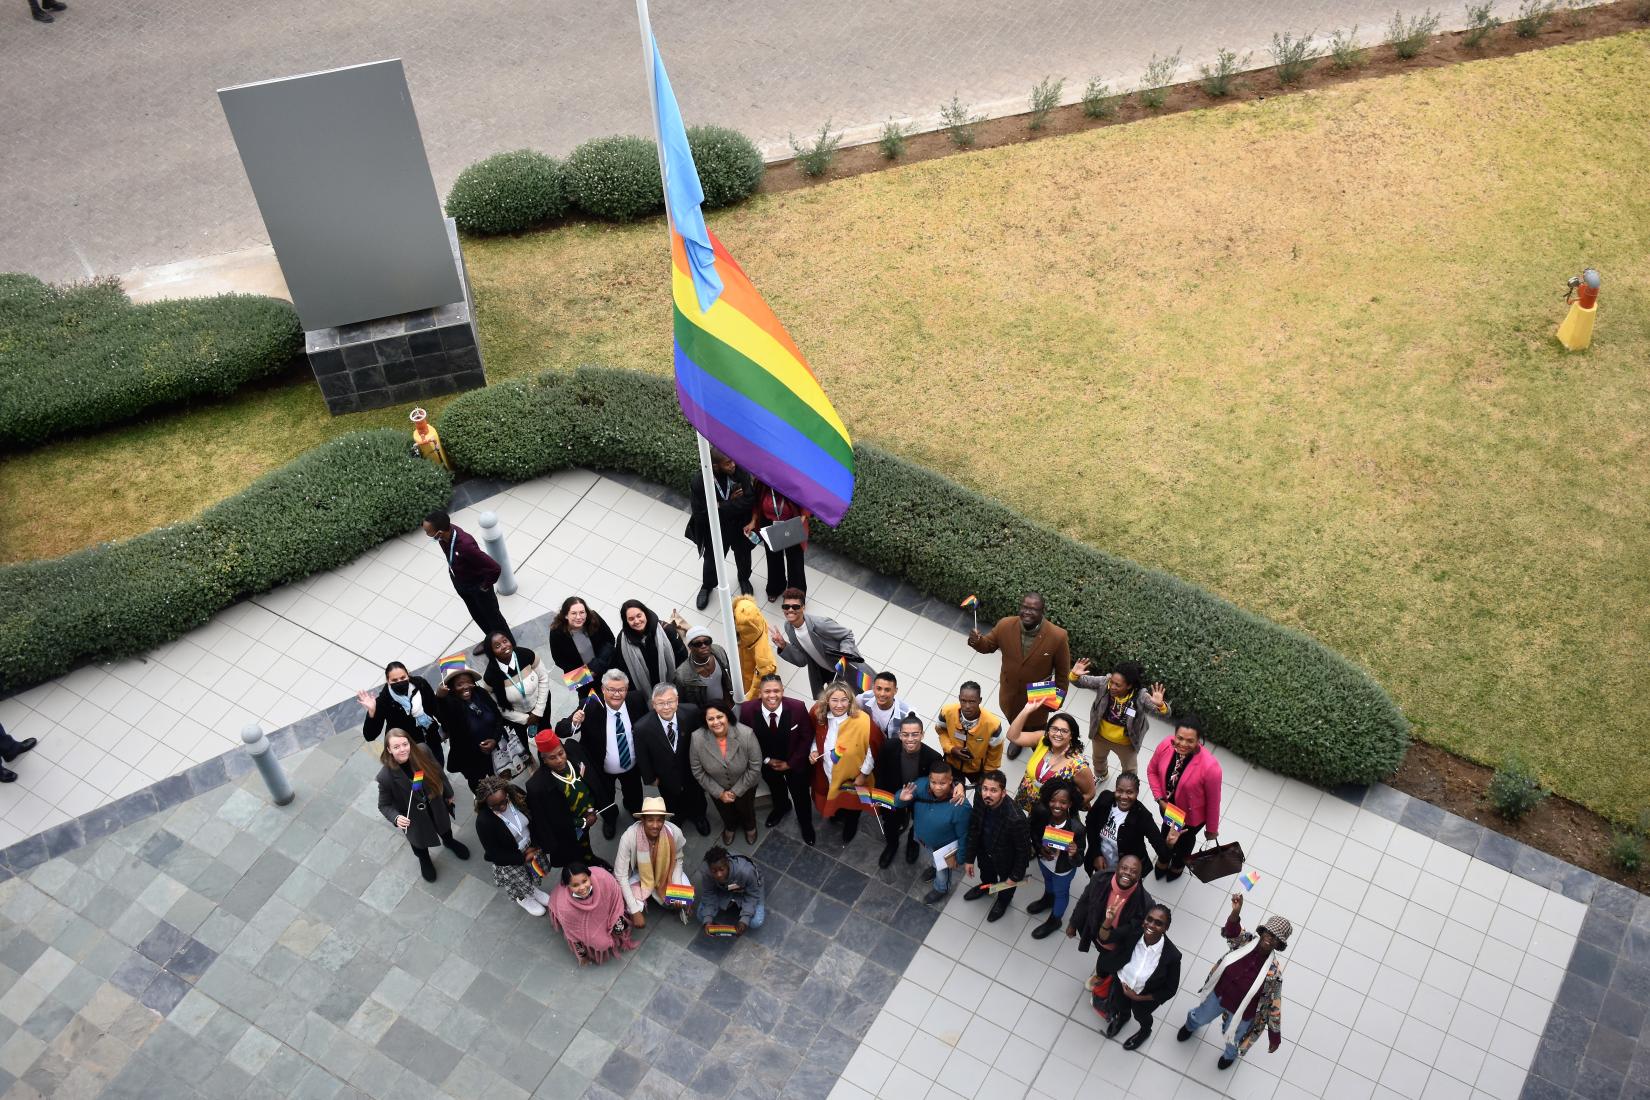 Participants proudly watch as the LGBTQ+ and UN flag is raised